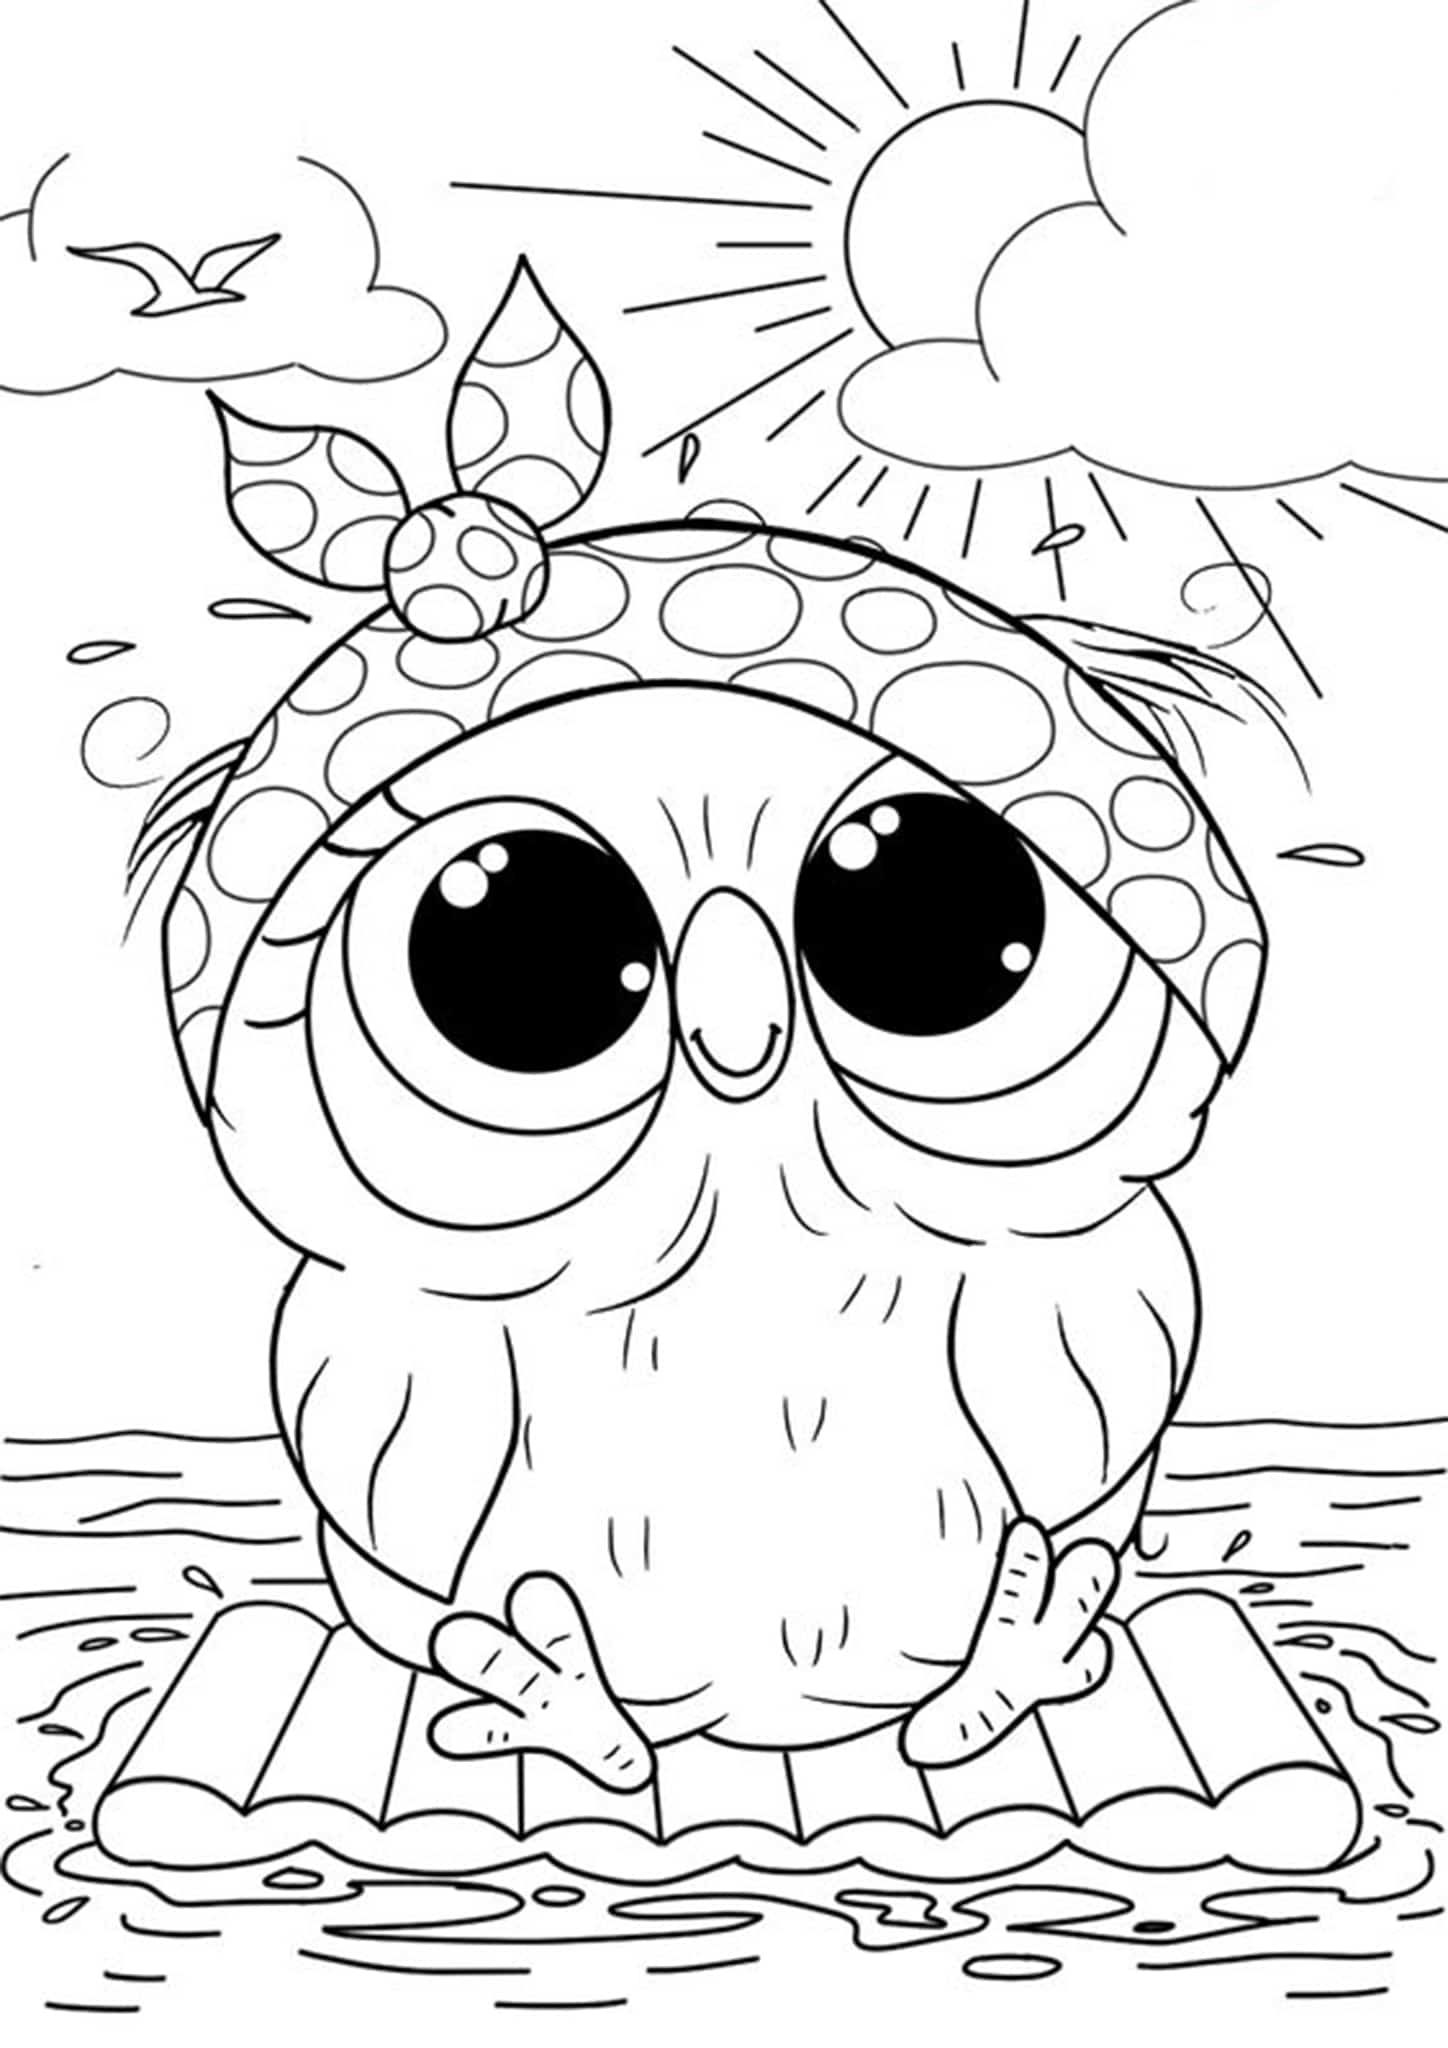 simple adult coloring pages